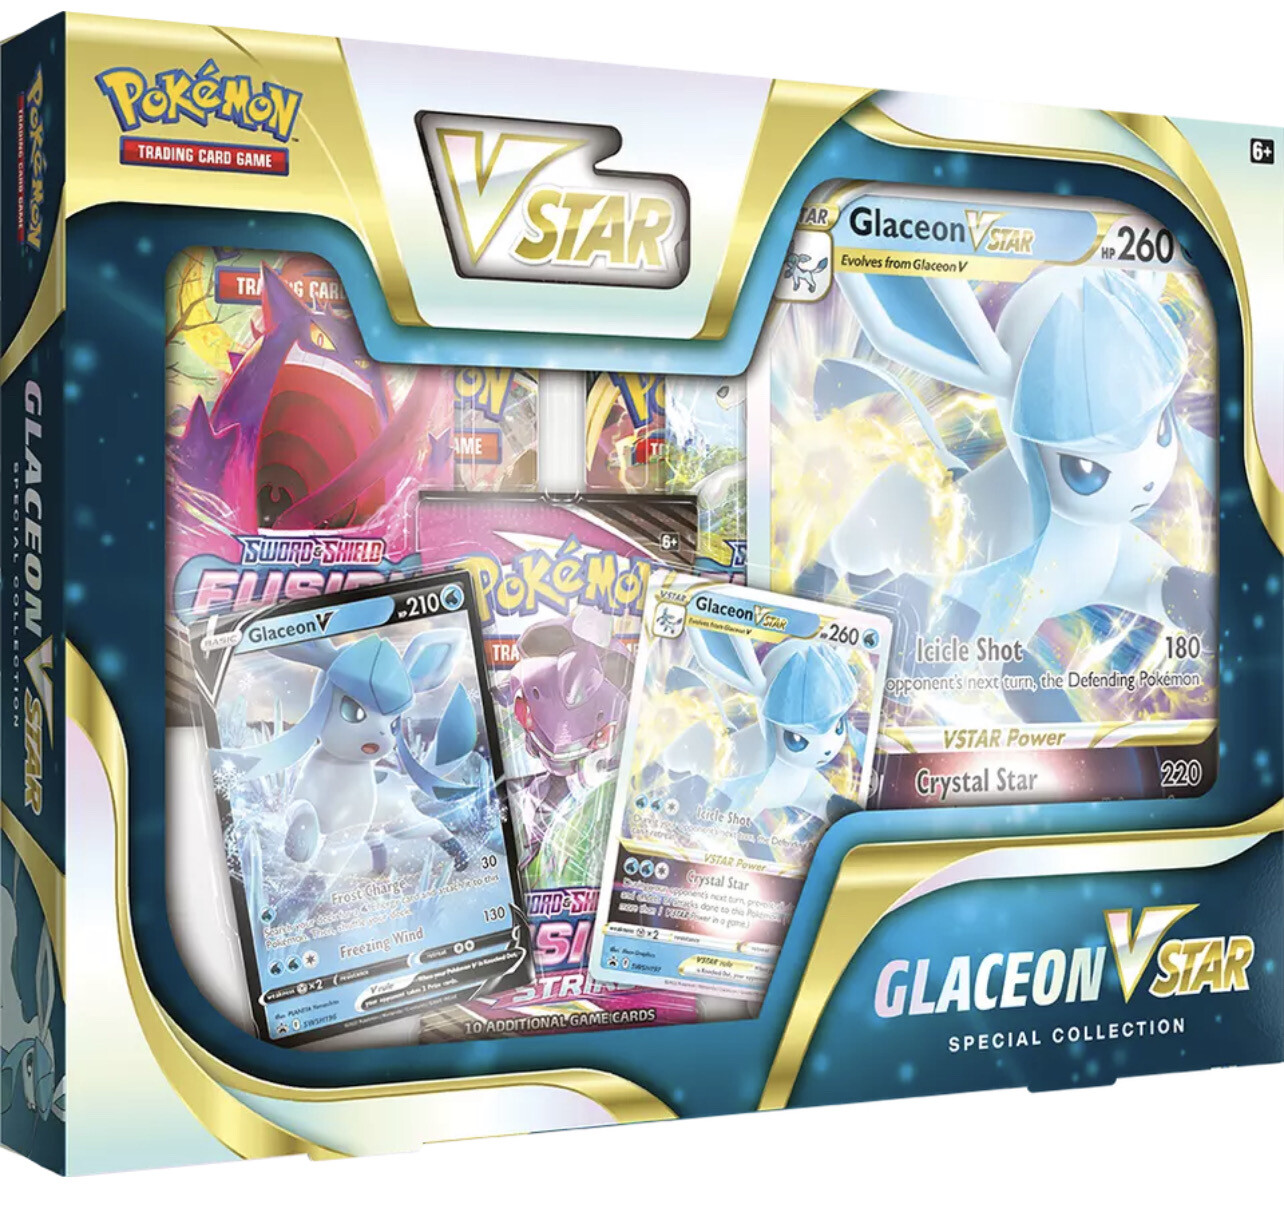 Pokemon Glaceon V Star Special Collection Box